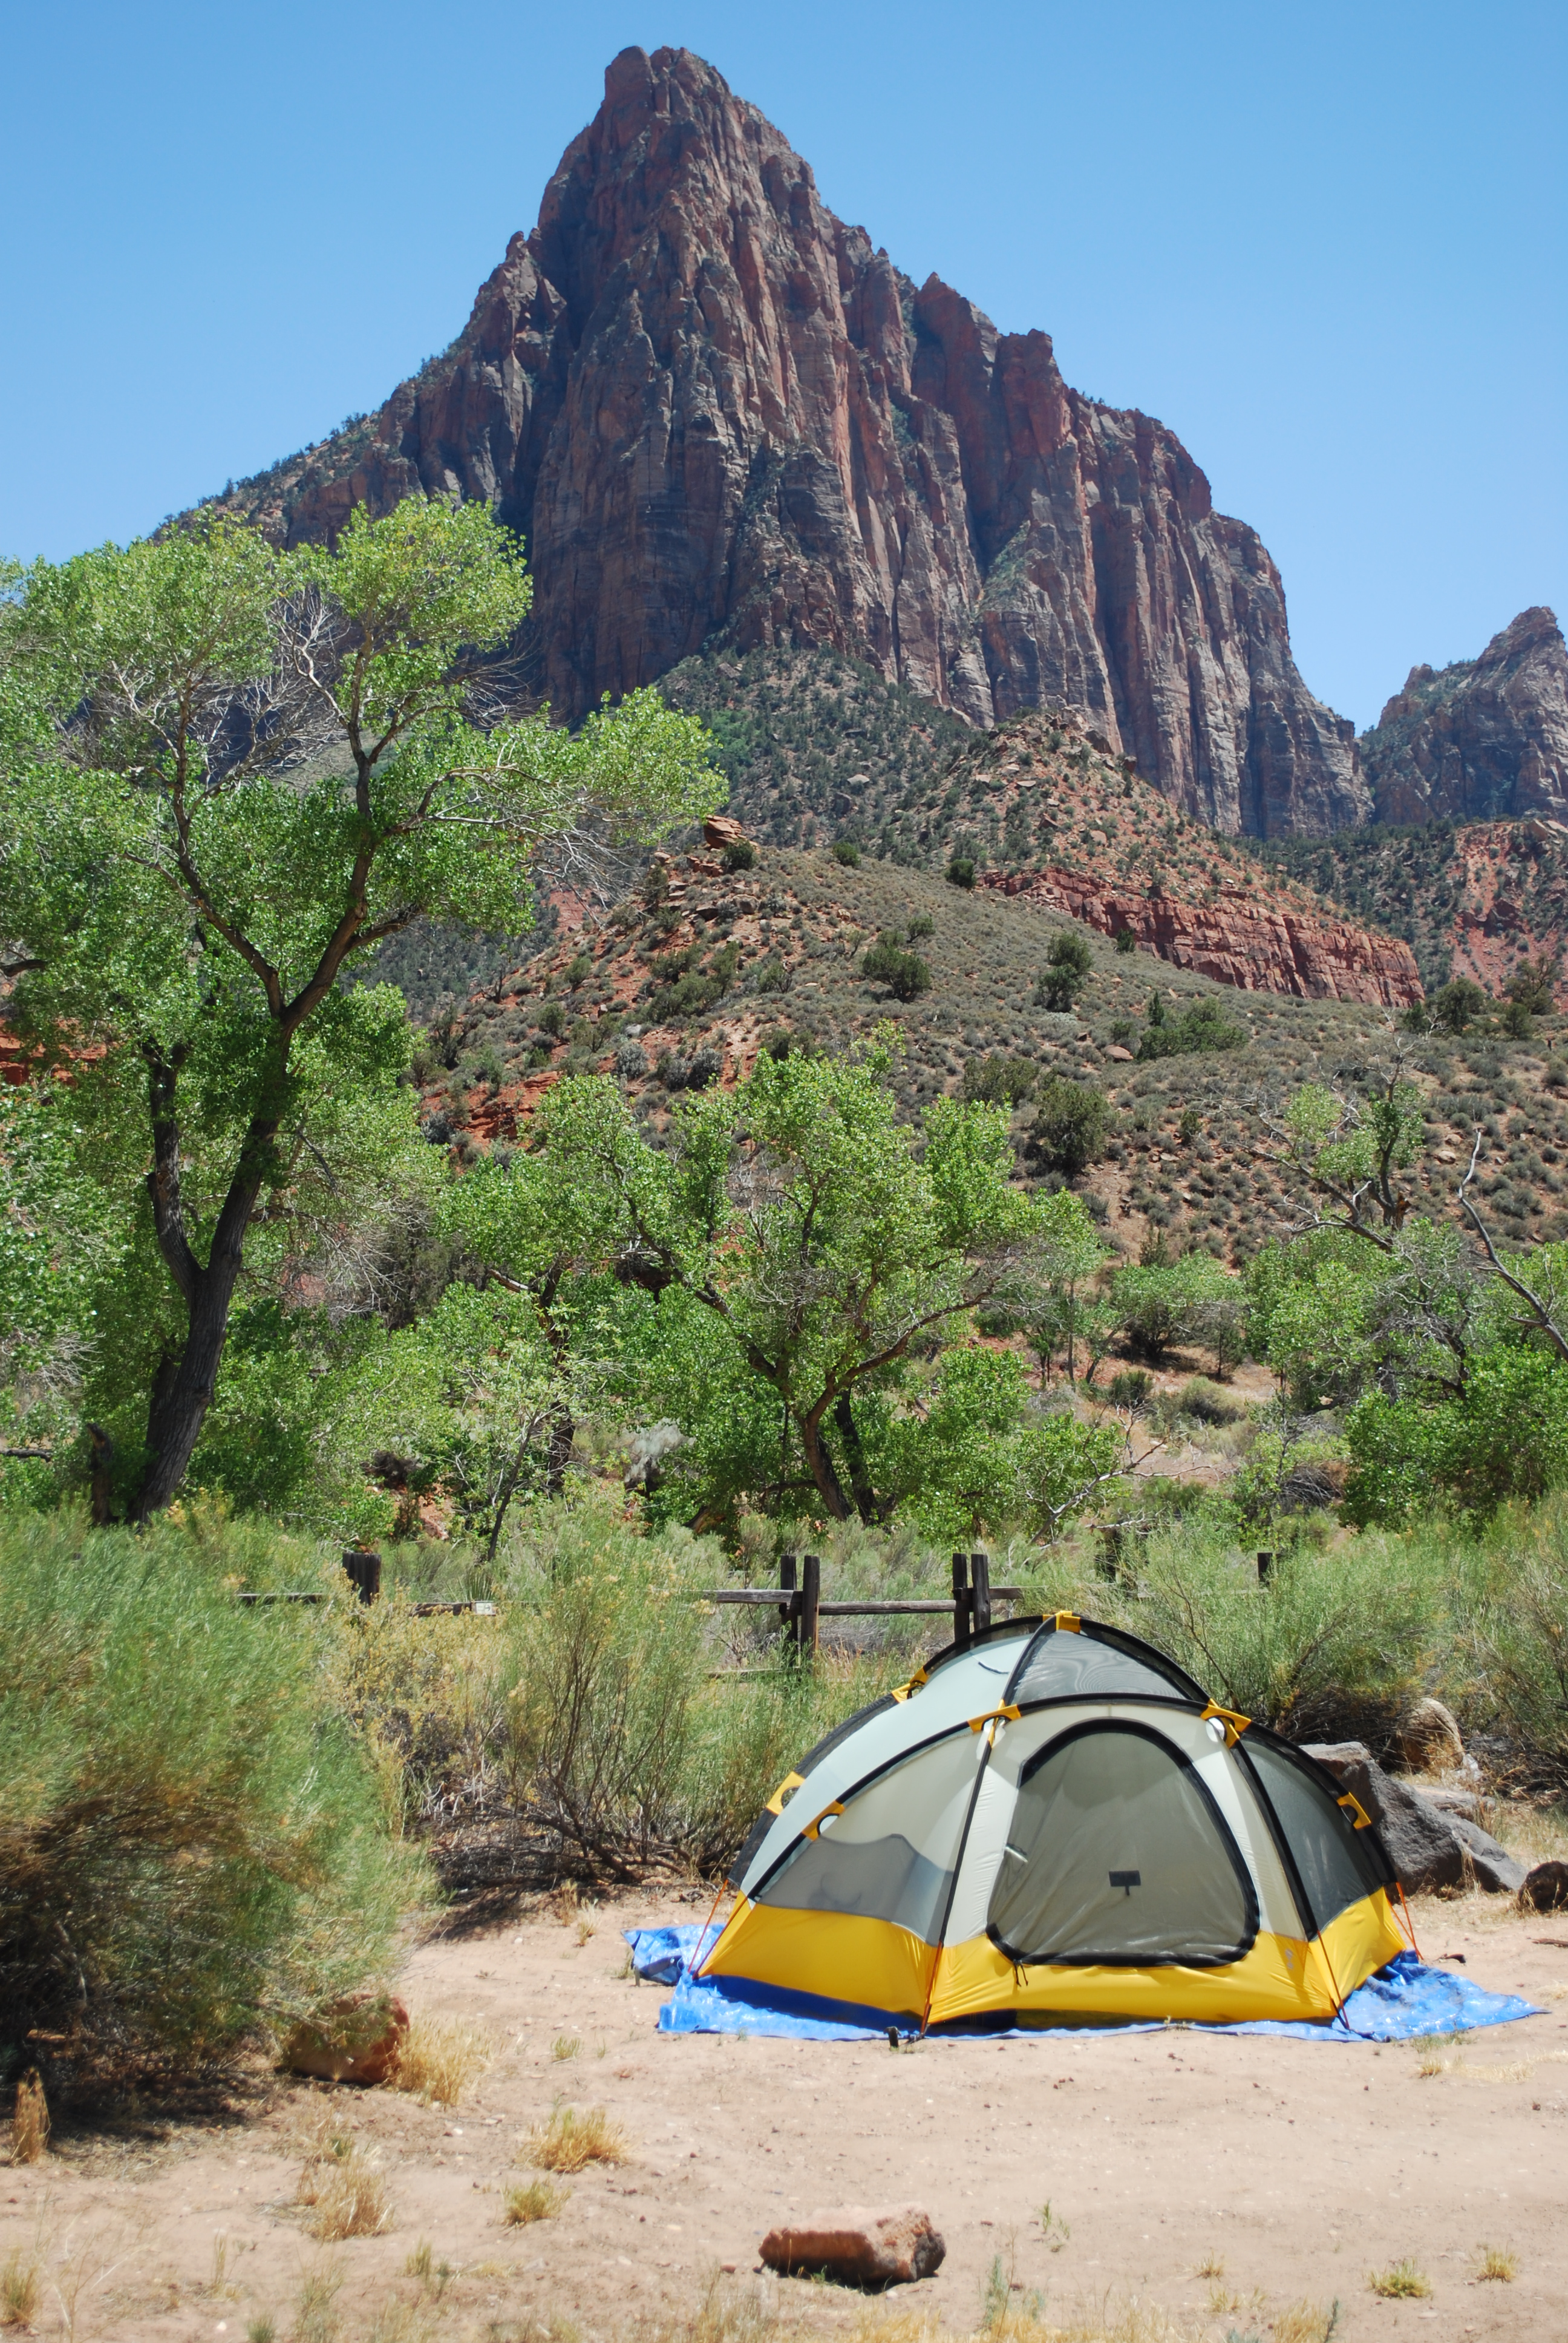 A tent stands on bare ground surrounded by green plants with red rocks rising high in the distance.